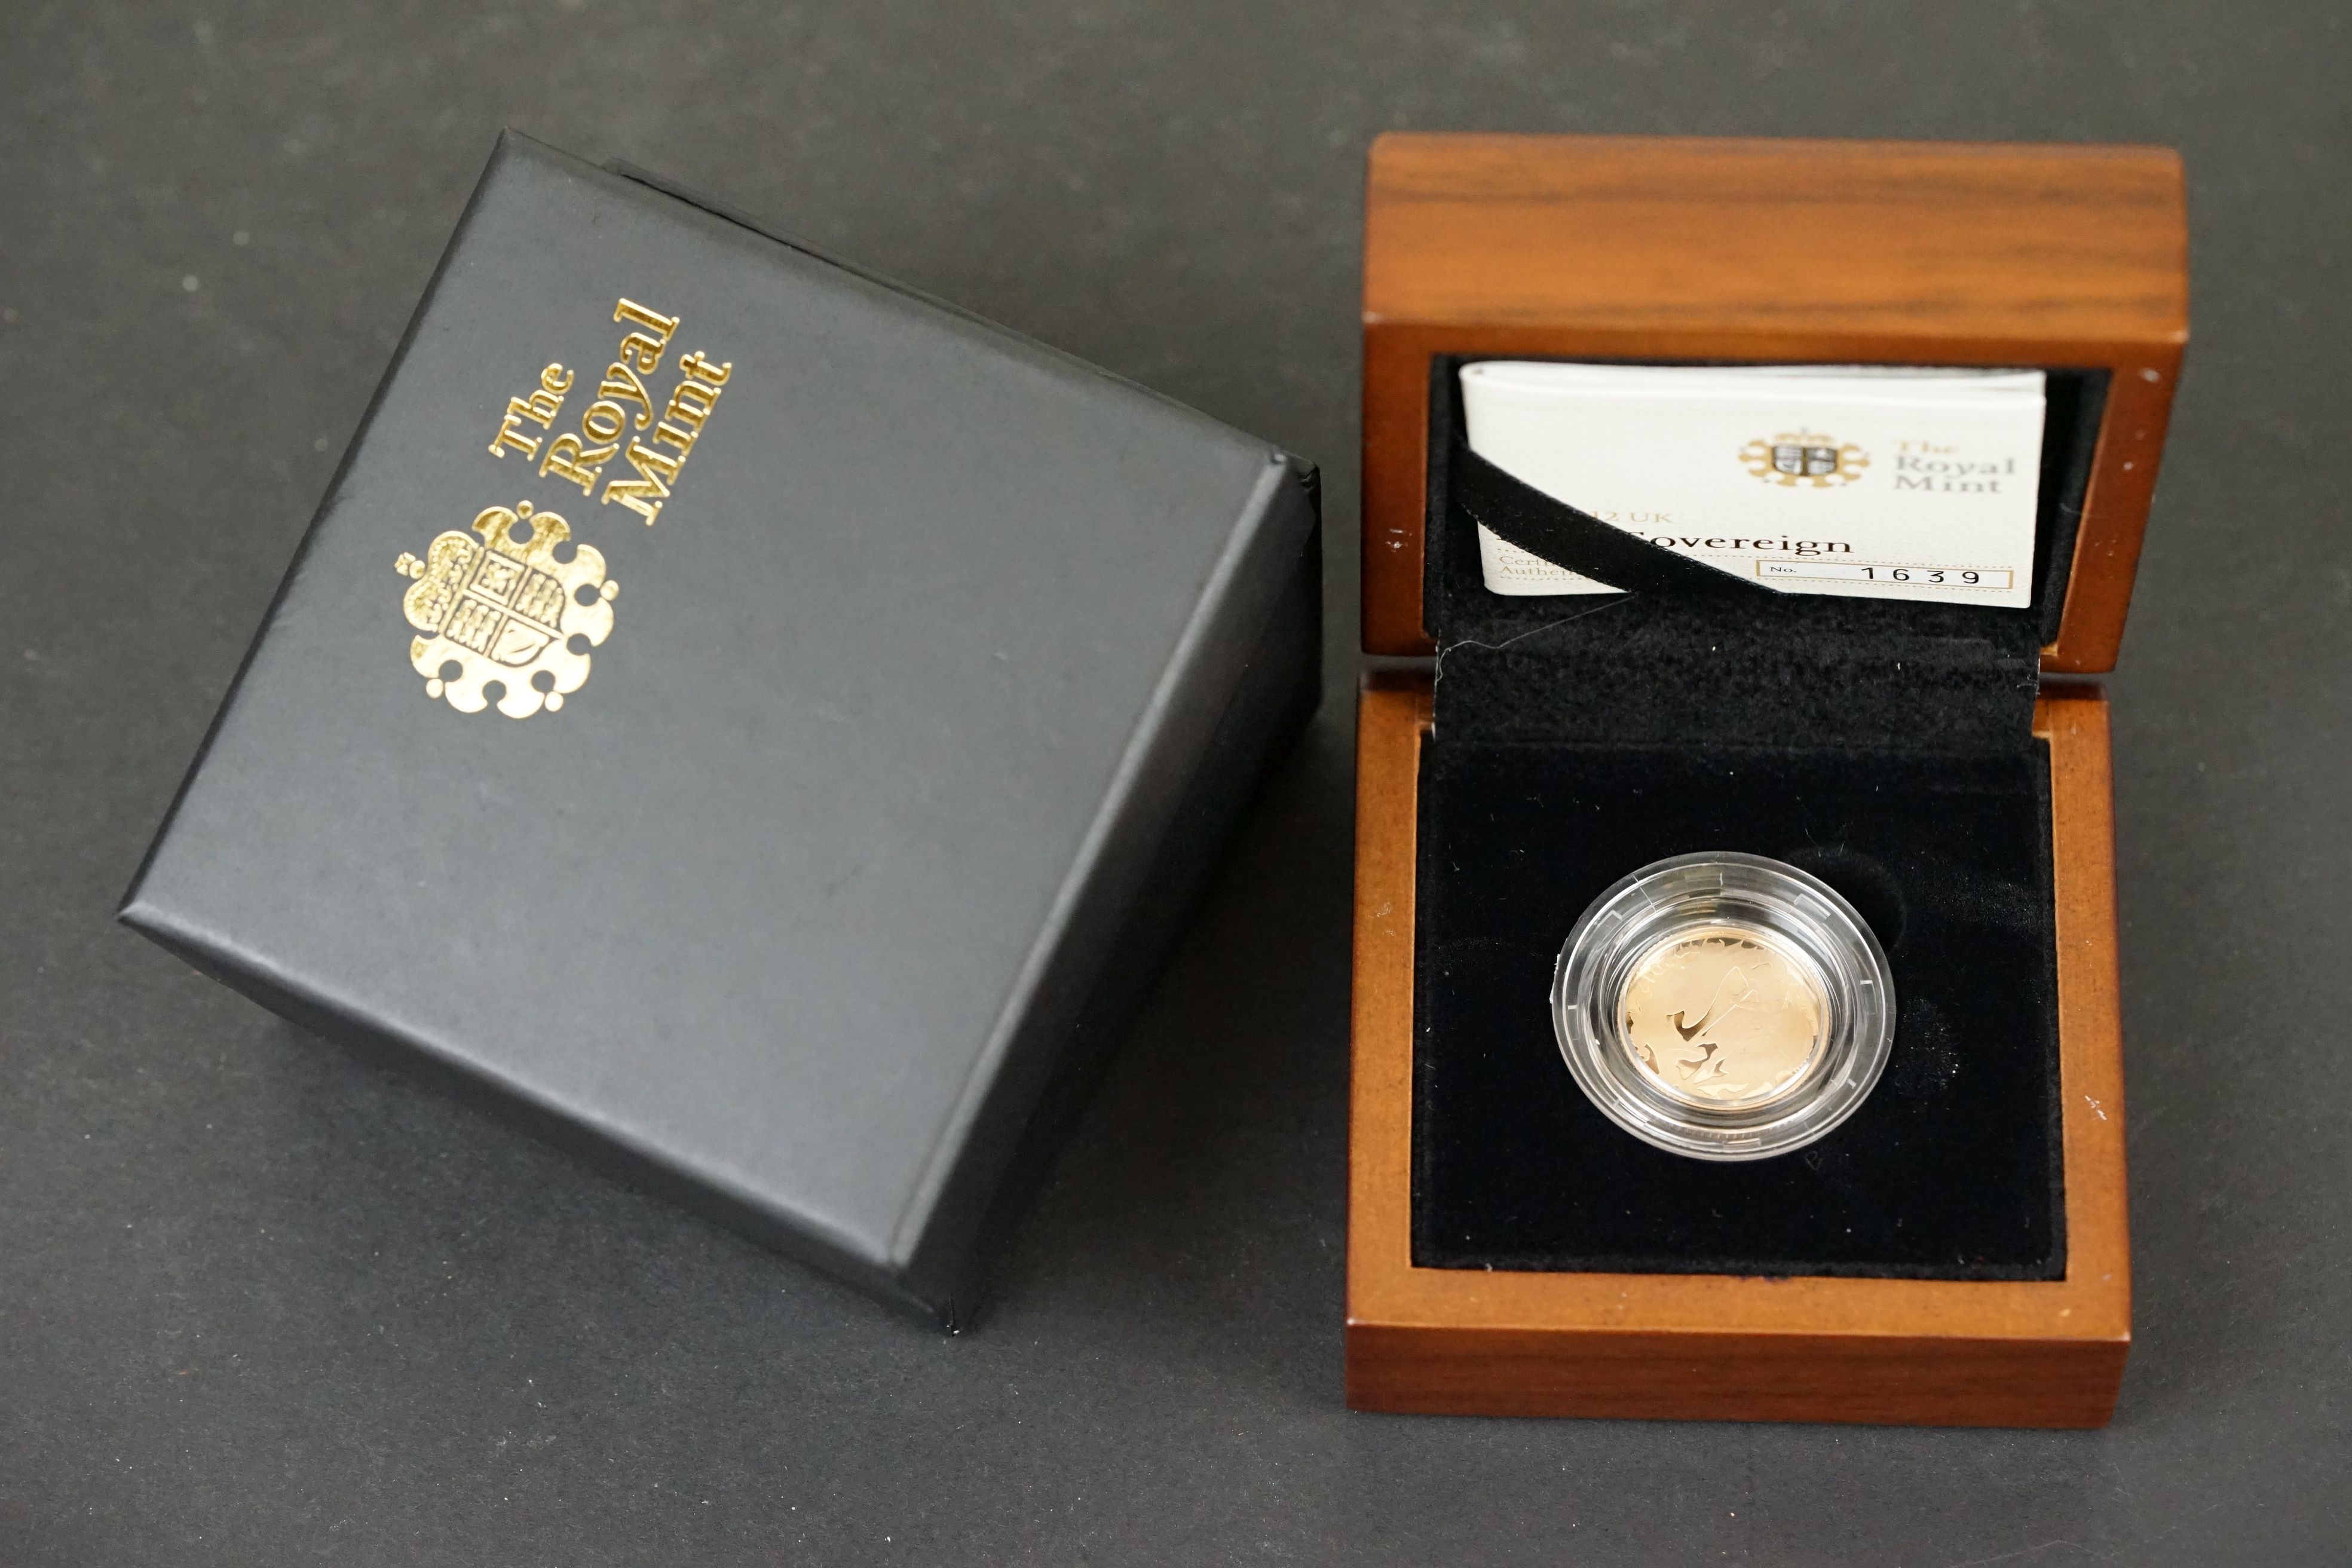 A Royal Mint 2012 UK Gold proof half sovereign coin complete with COA and presentation box.